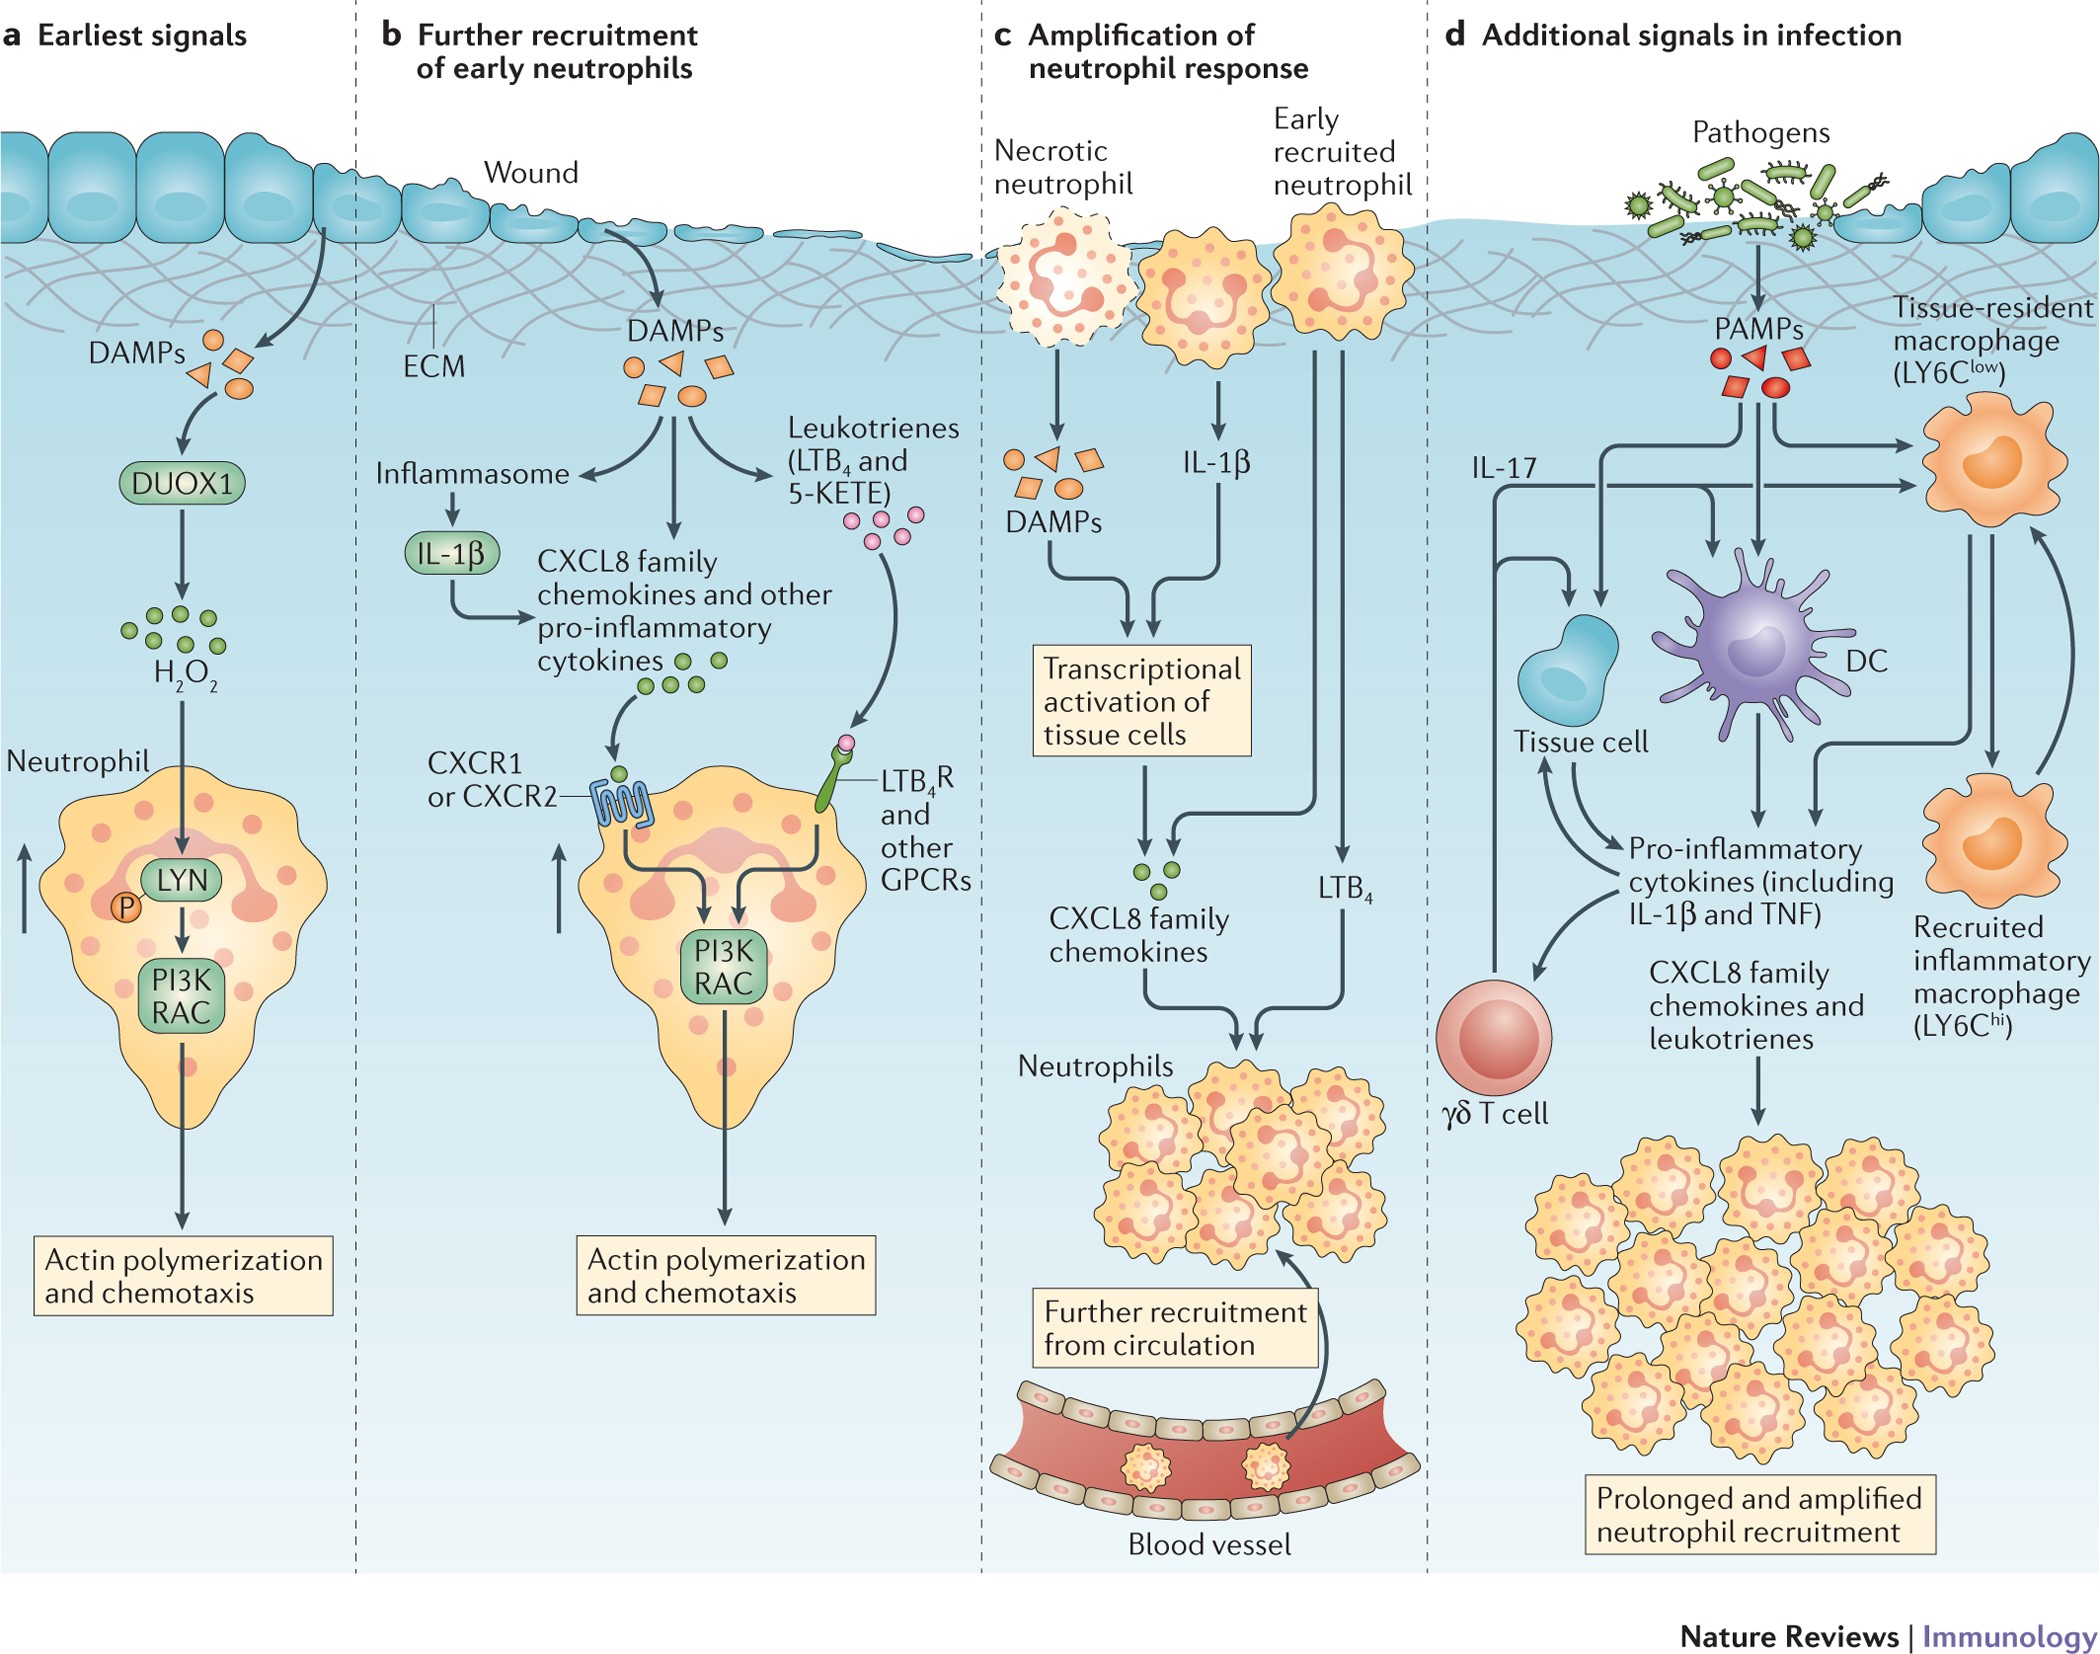 Neutrophil migration in infection and wound repair: going forward in  reverse